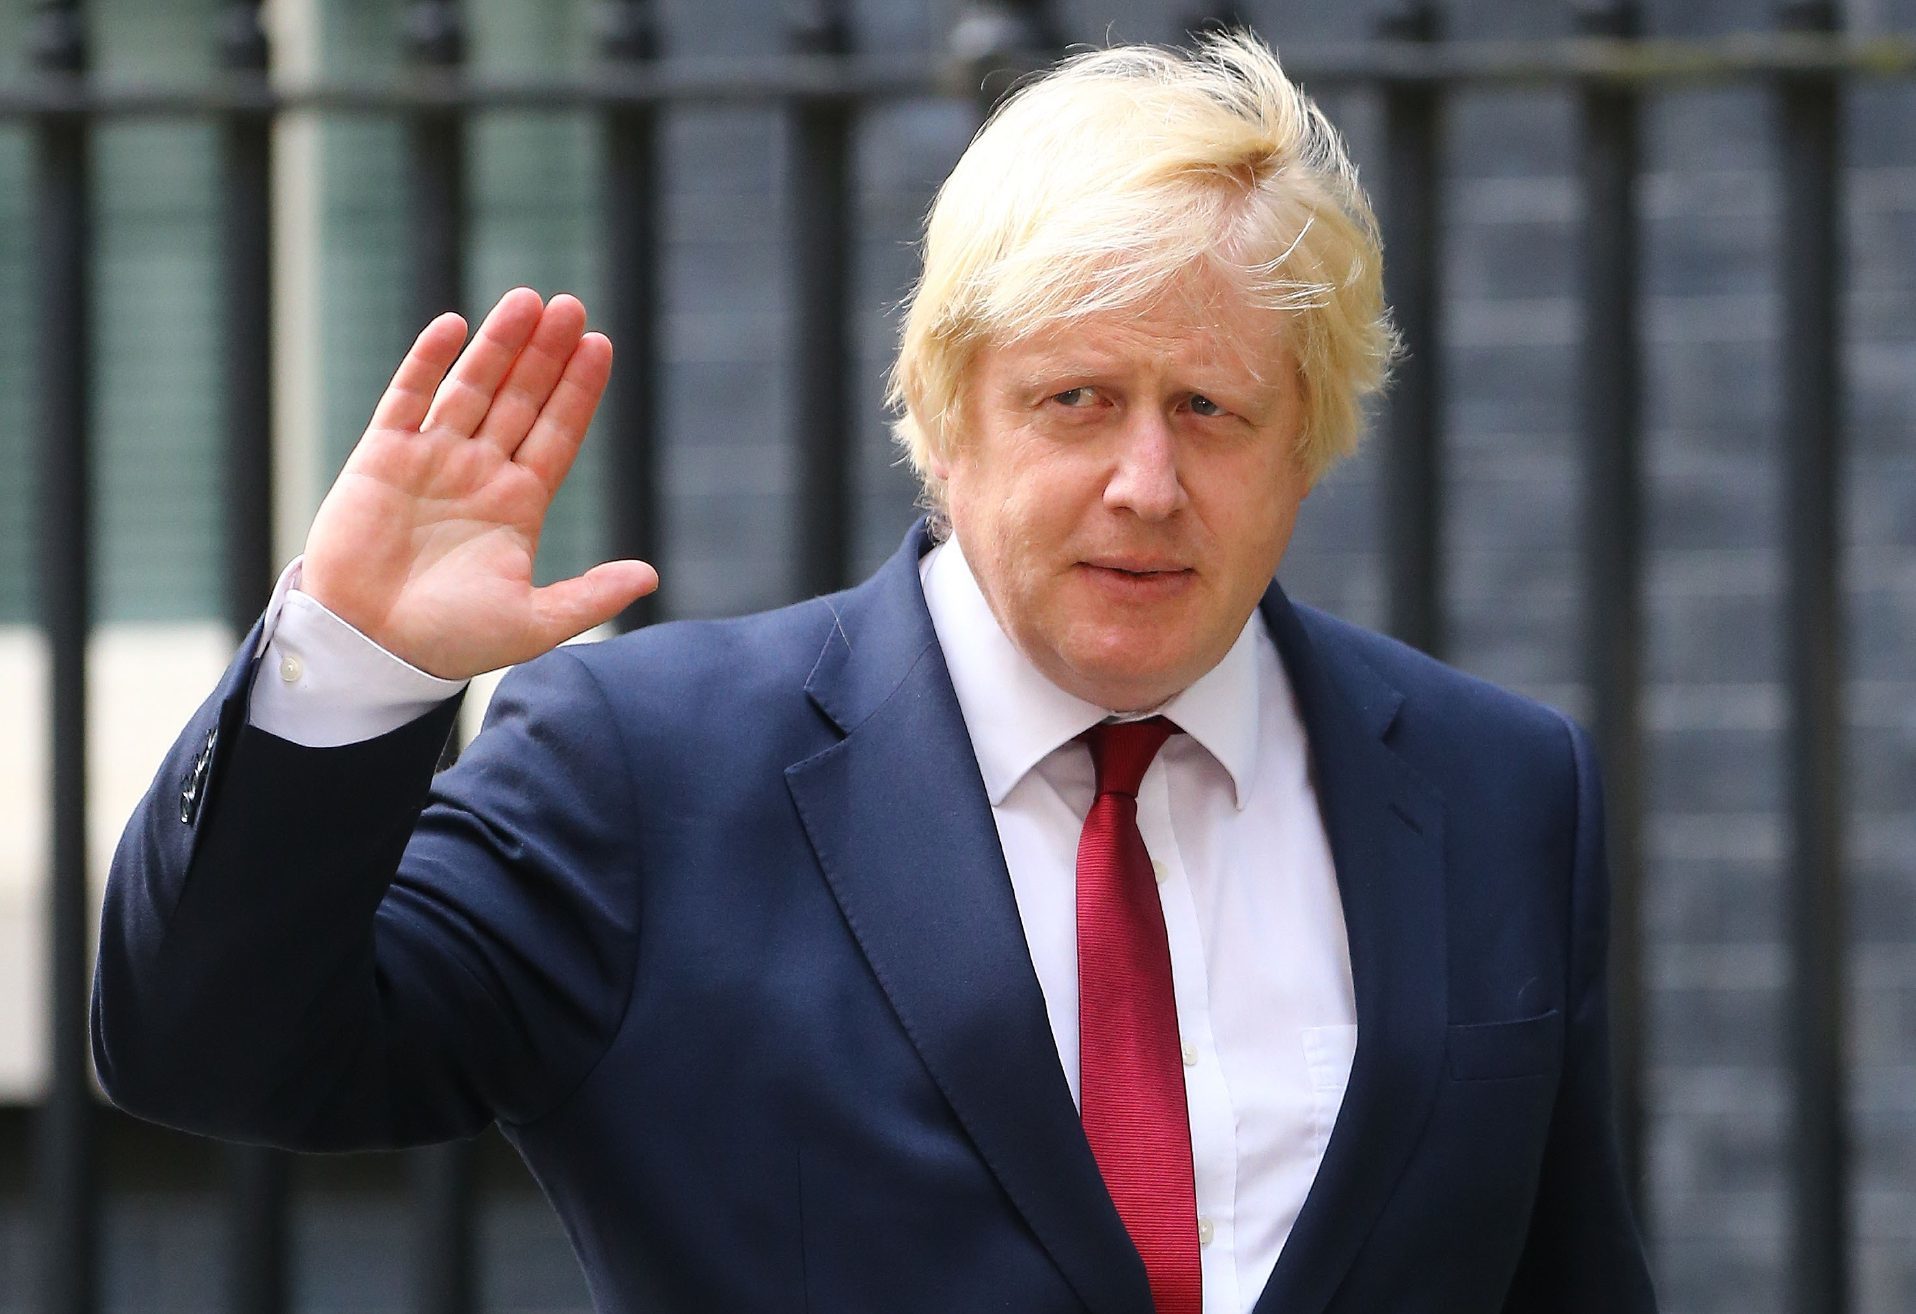 Boris Johnson is under pressure but has so far refused to apologise for his comments.